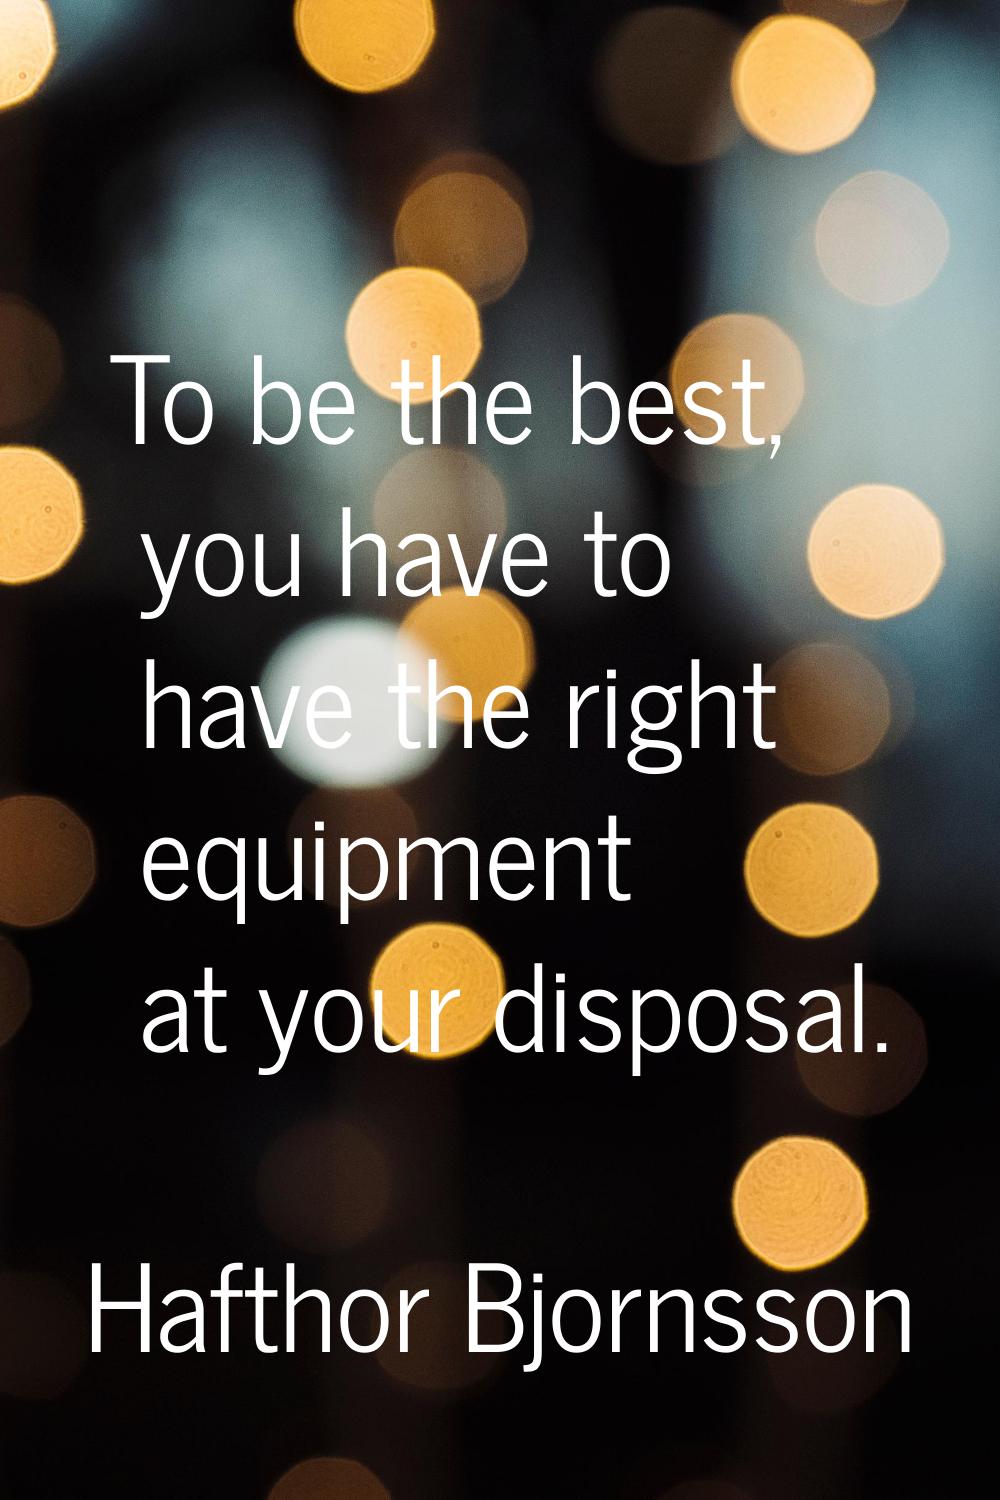 To be the best, you have to have the right equipment at your disposal.